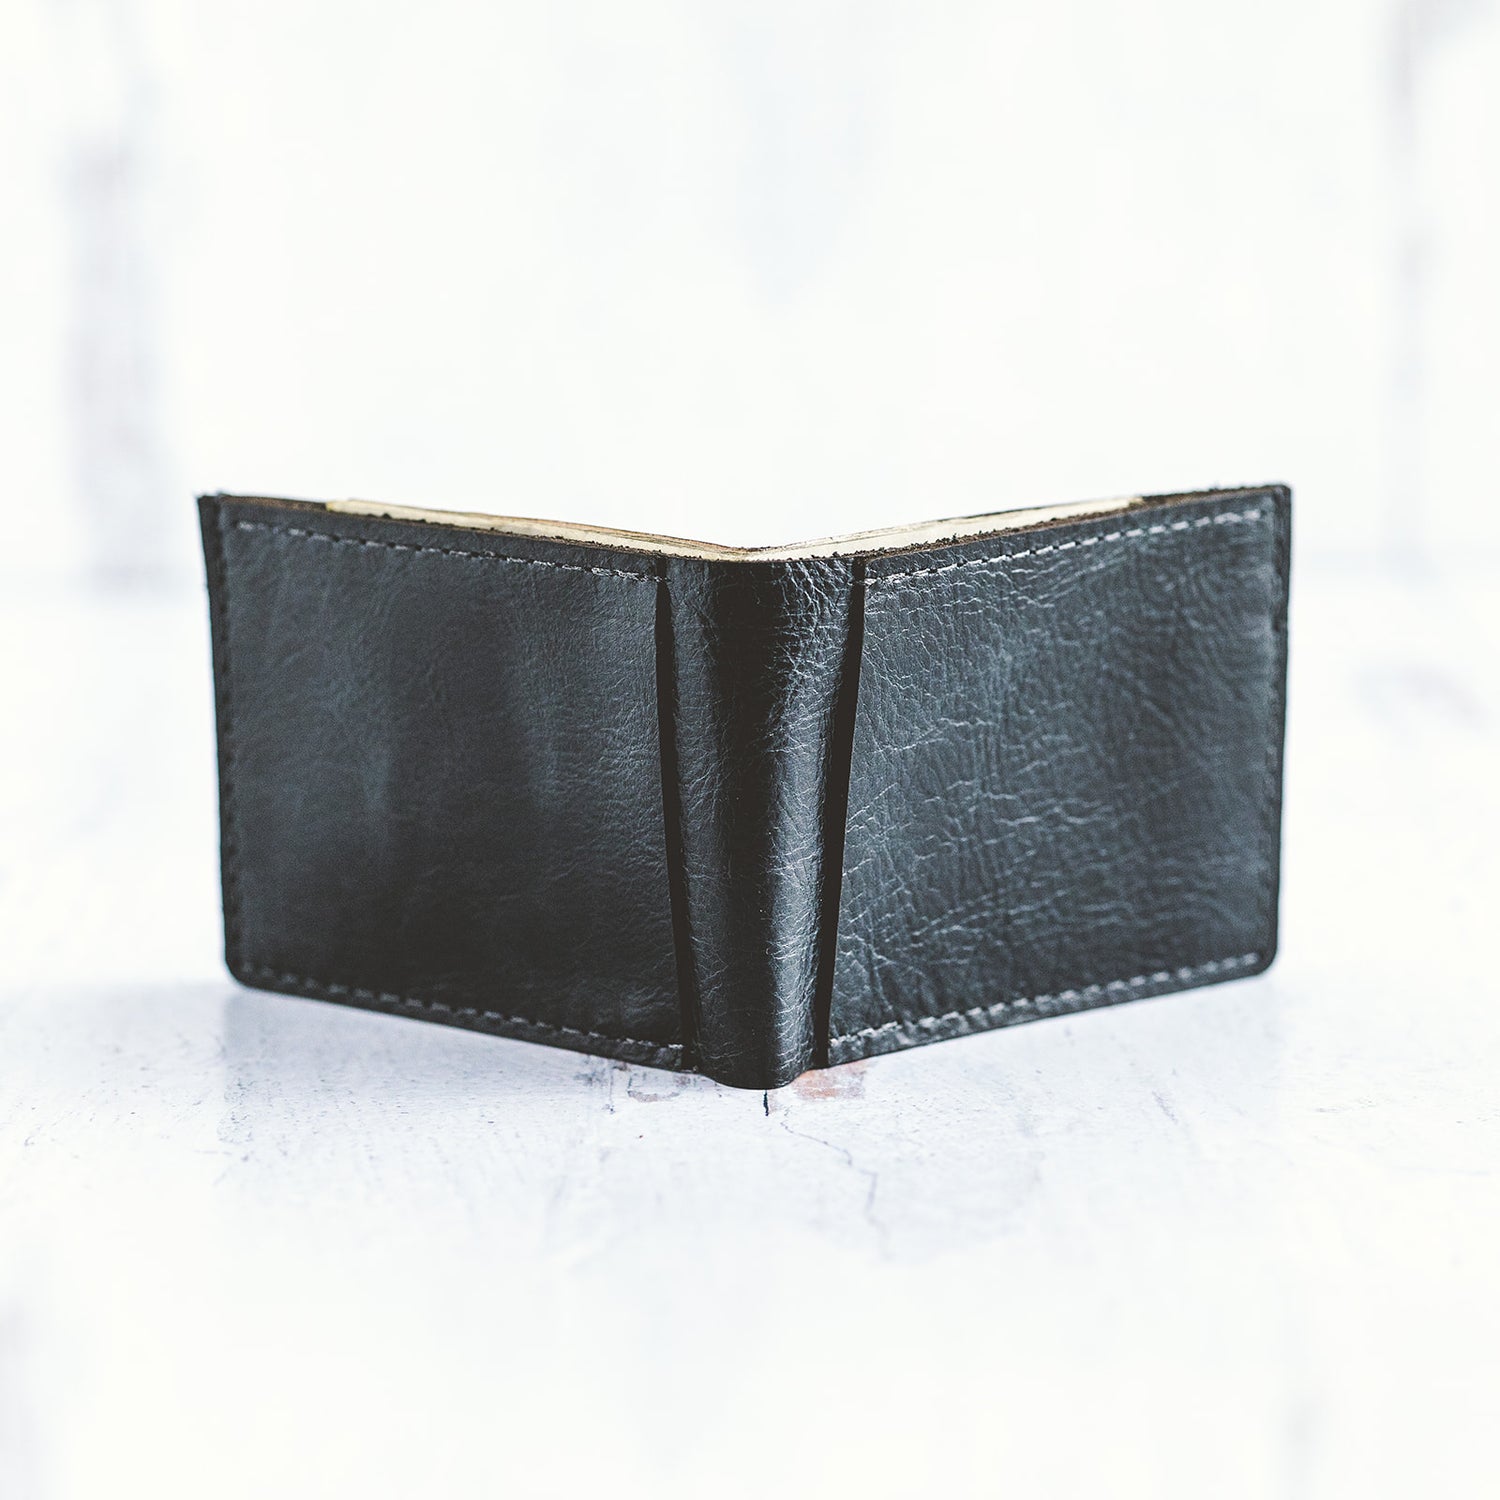 Bifold Leather Wallet - Customizable